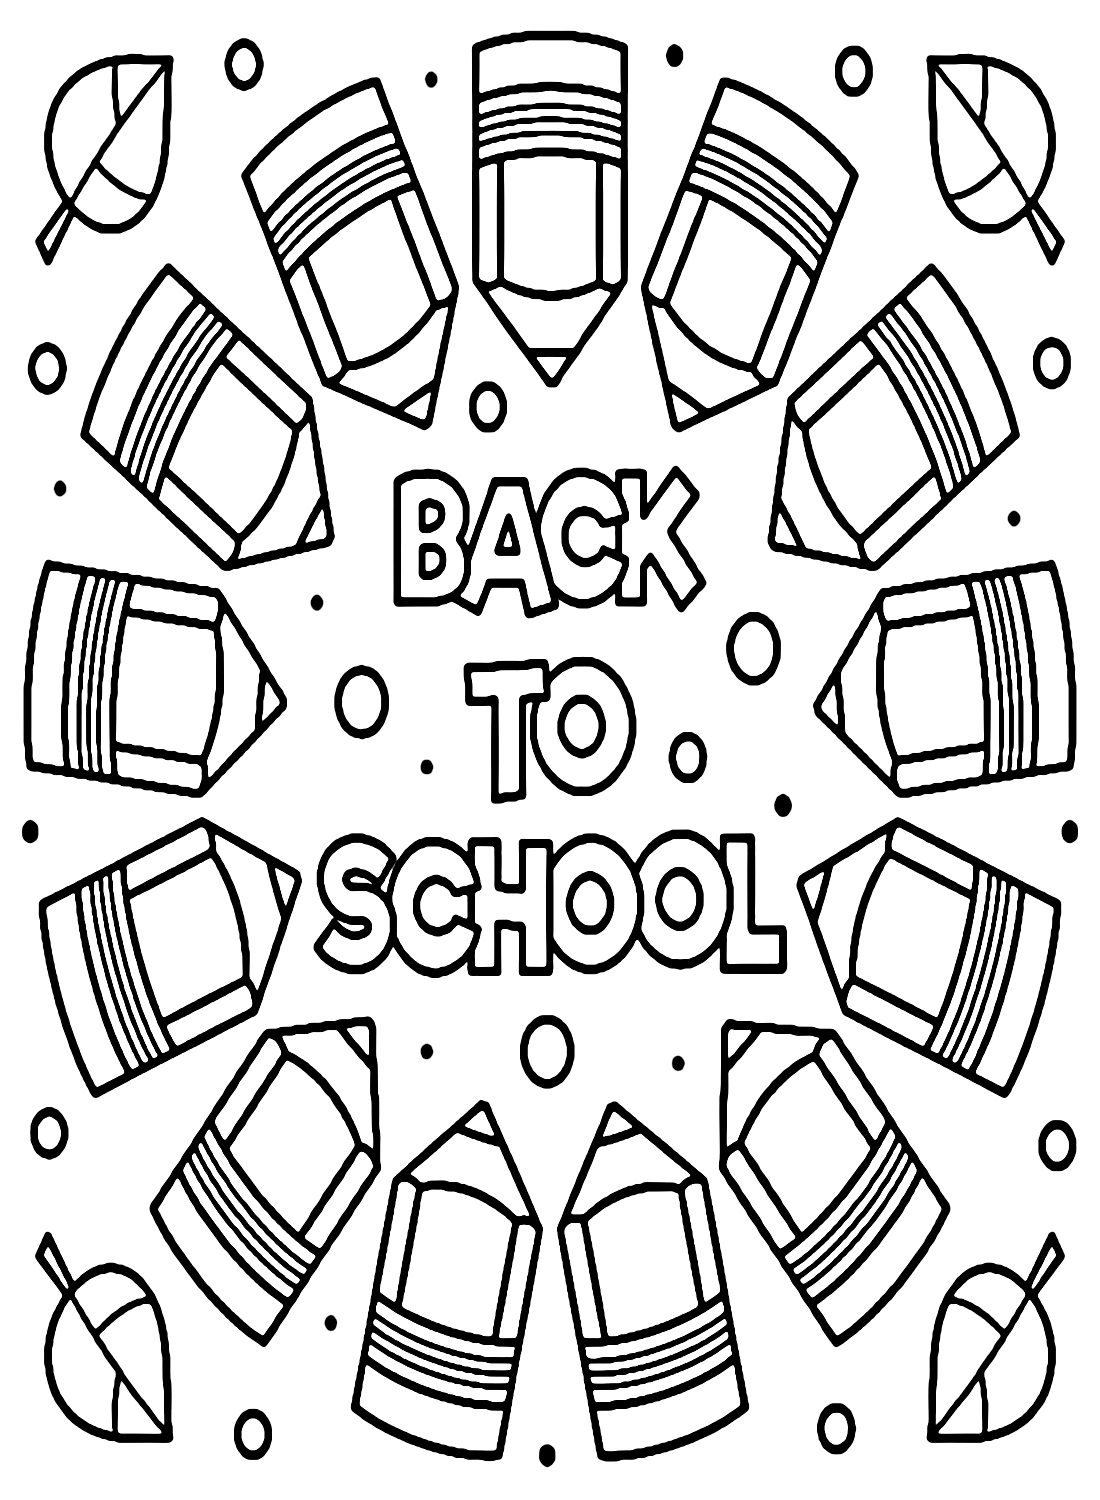 Back to School Coloring Pages Online